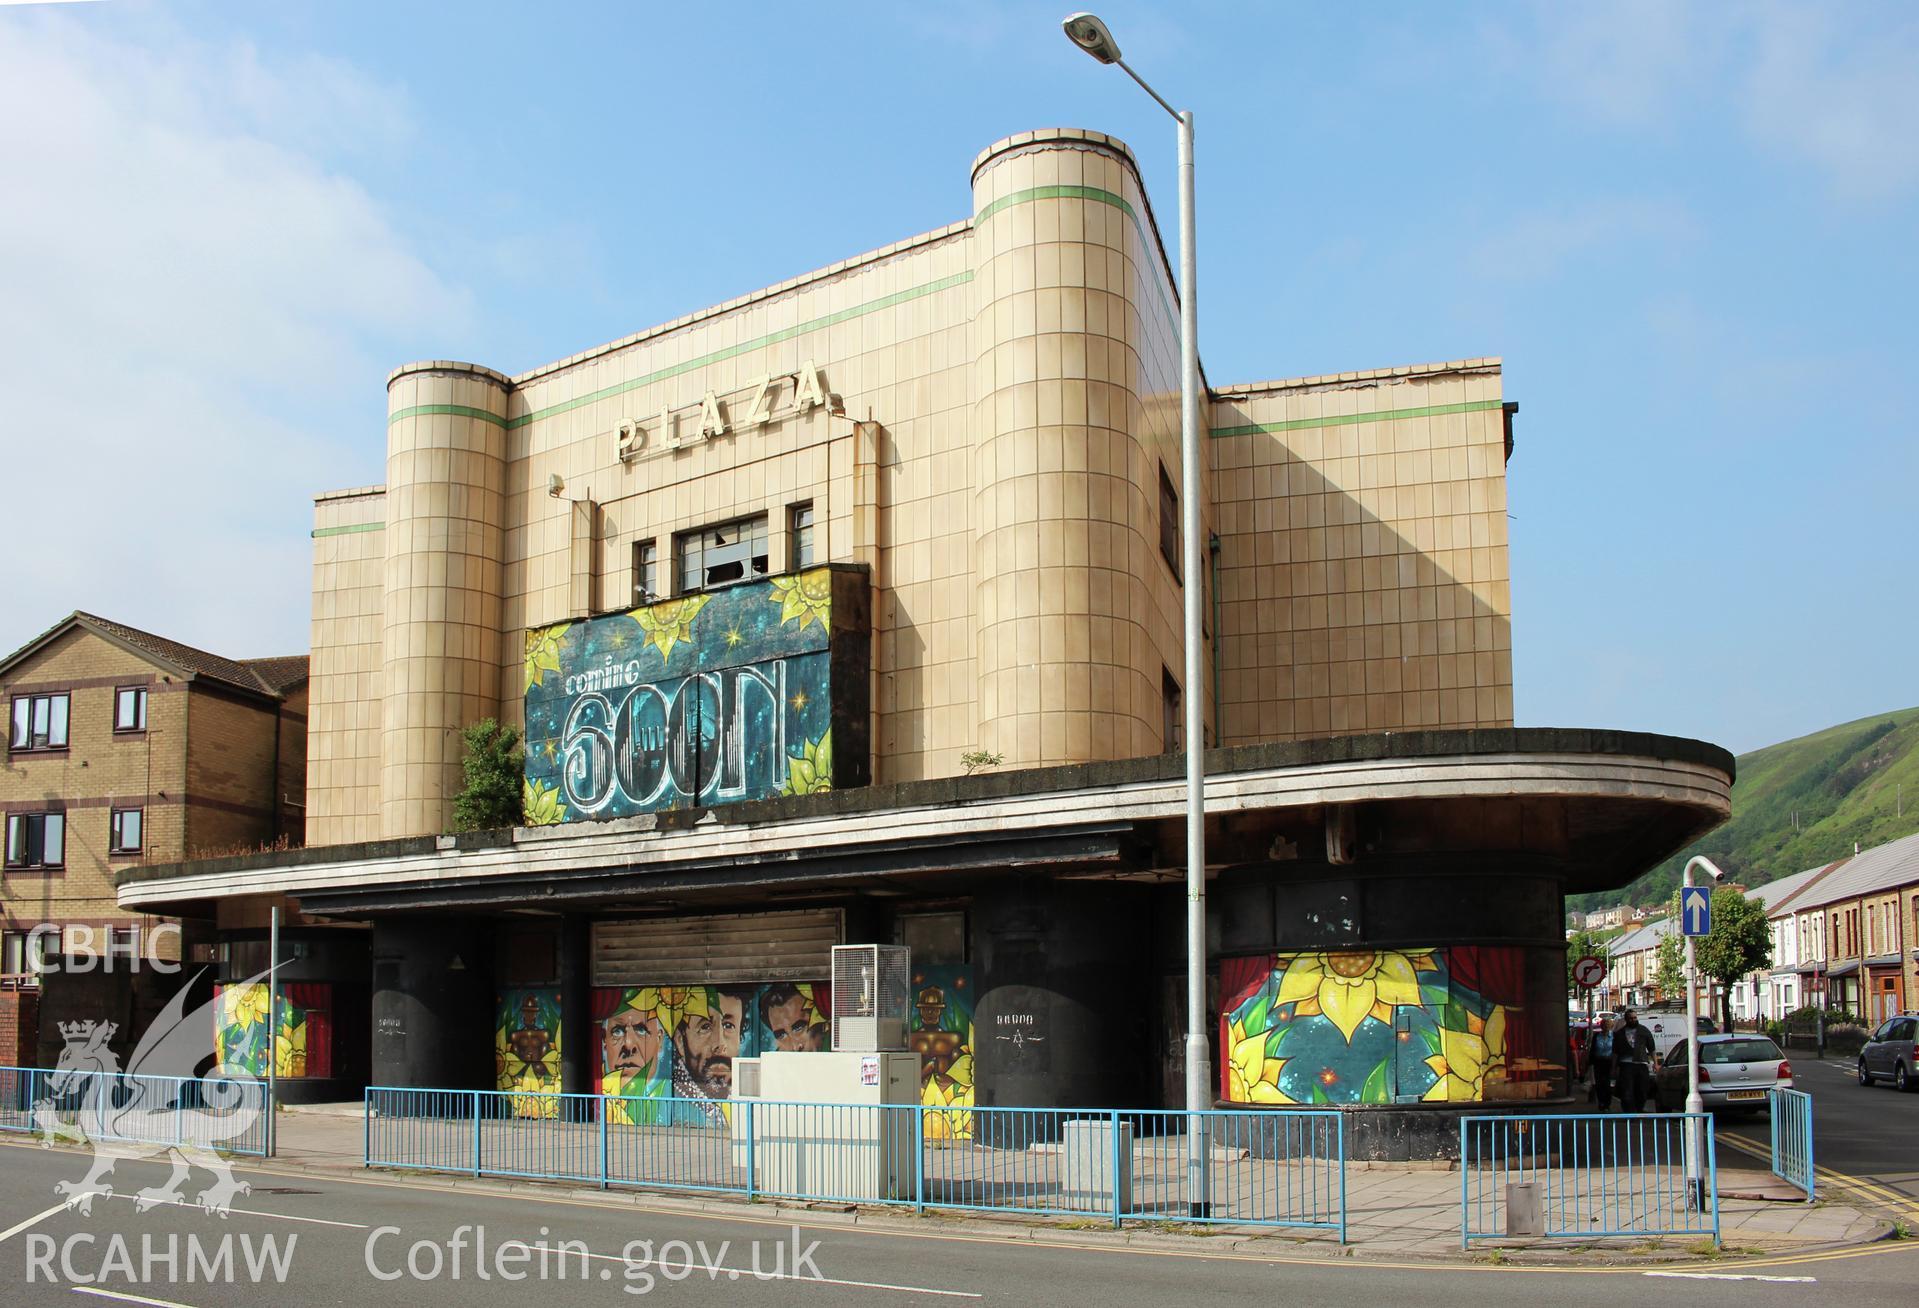 Exterior view of the front elevation of Plaza Cinema, Port Talbot. Photographed during survey conducted by Sue Fielding for the RCAHMW, 6th March 2019.